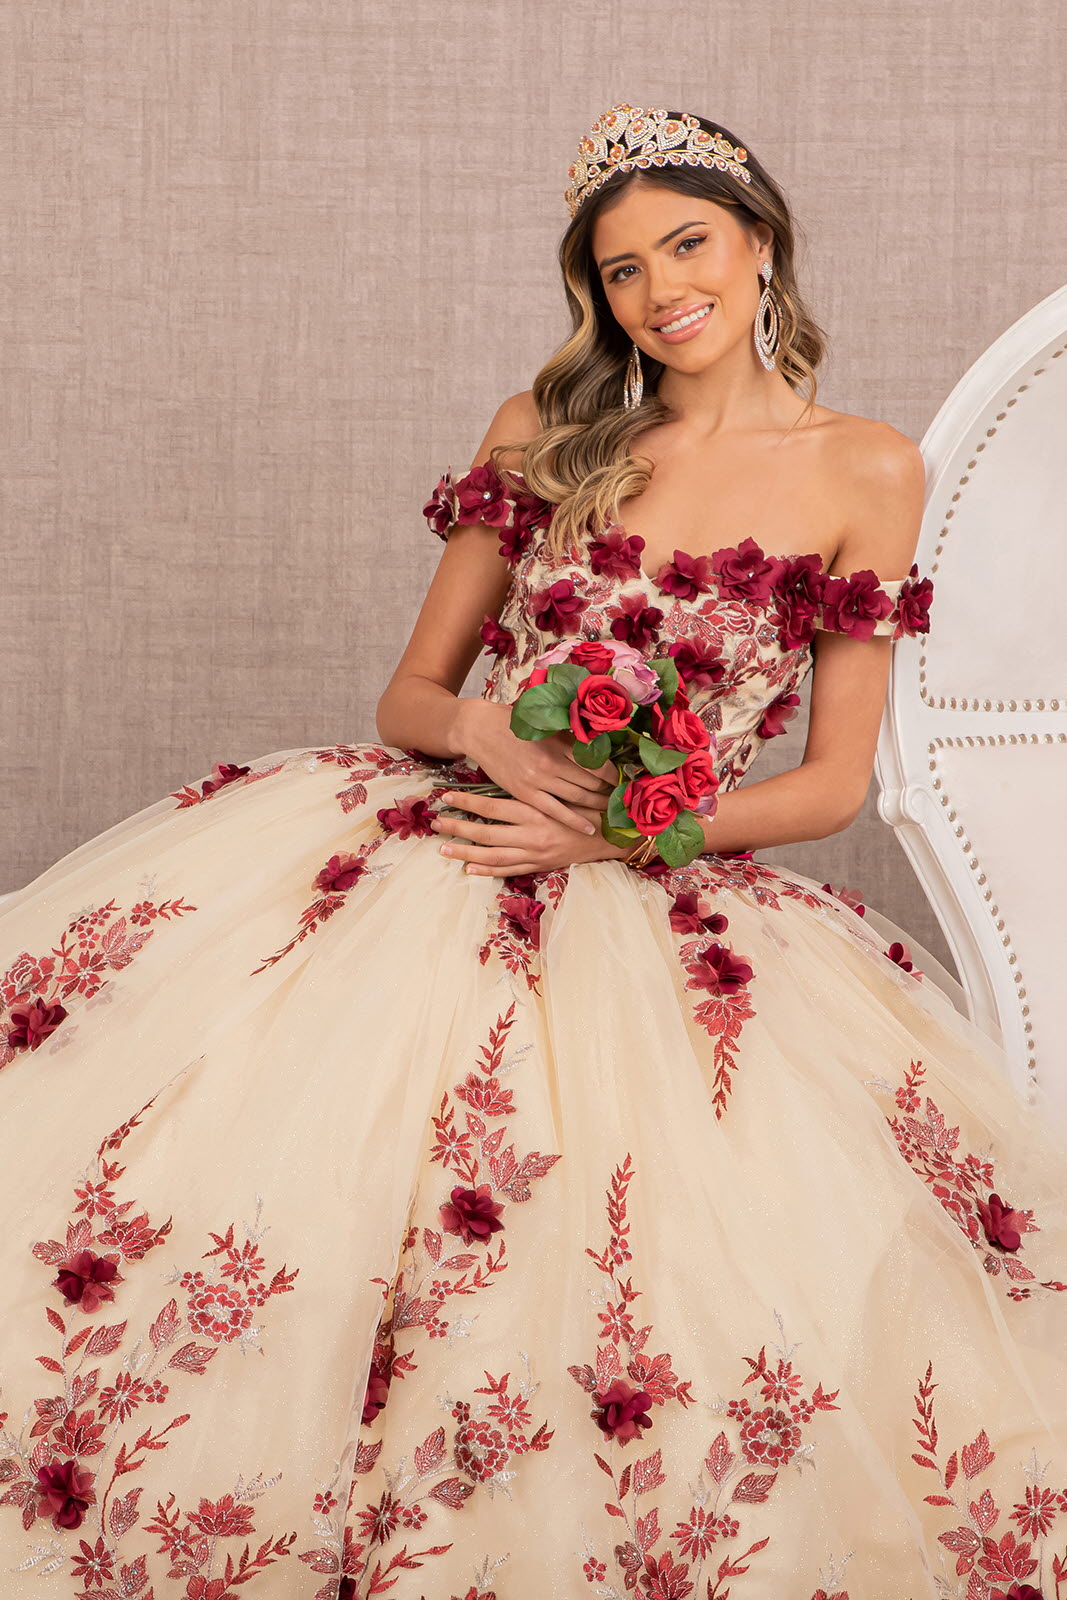 3D Flower Embroidery Off Shoulder Mesh Quinceanera Gown GLGL3105-QUINCEANERA-smcfashion.com